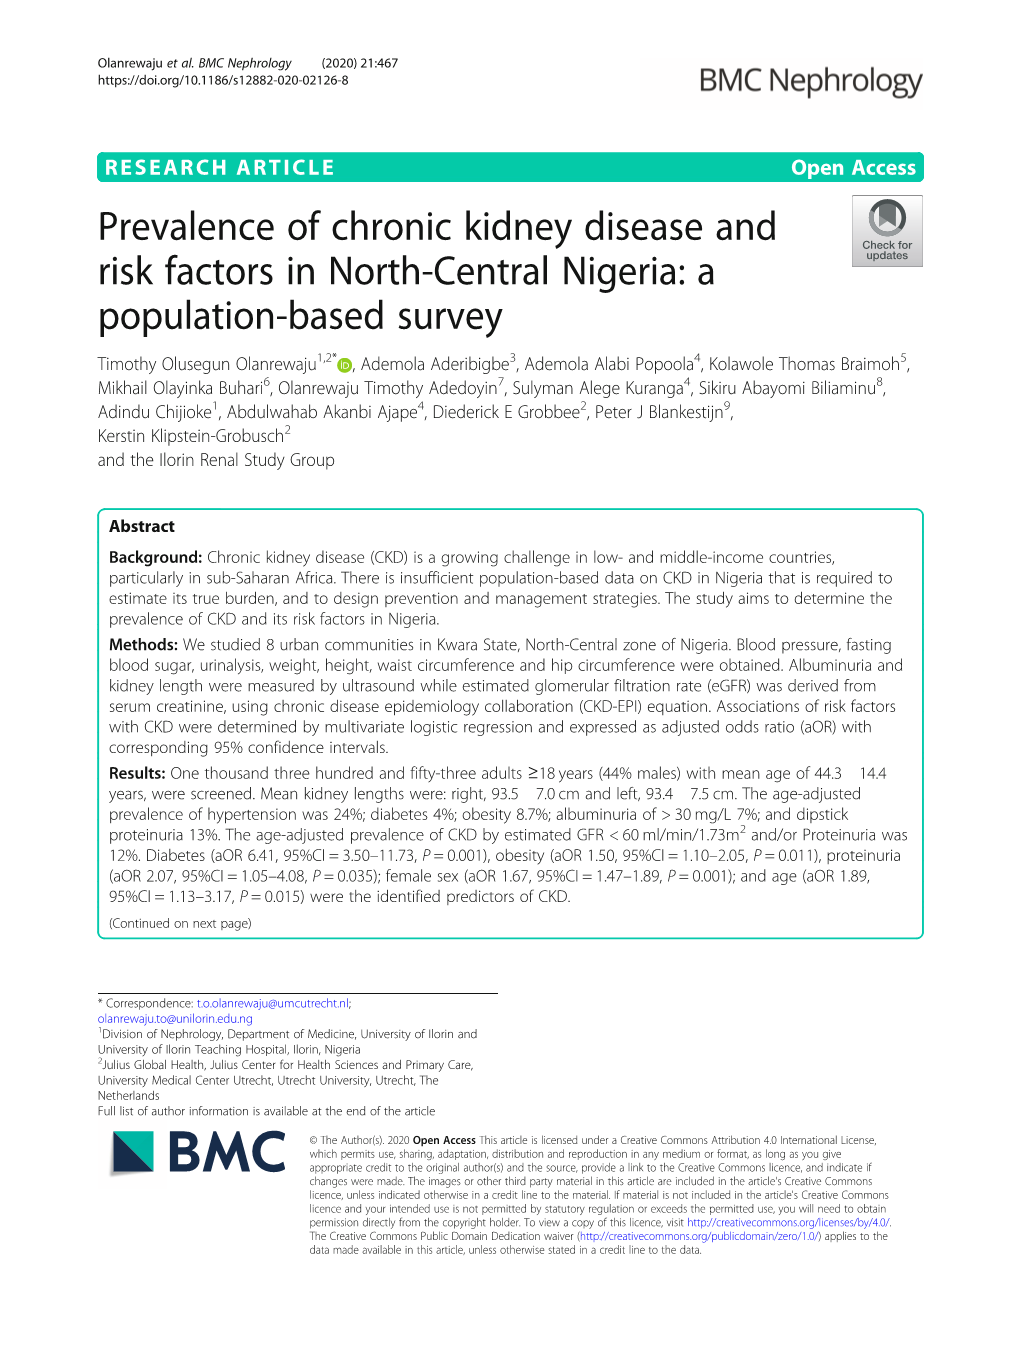 Prevalence of Chronic Kidney Disease and Risk Factors in North-Central